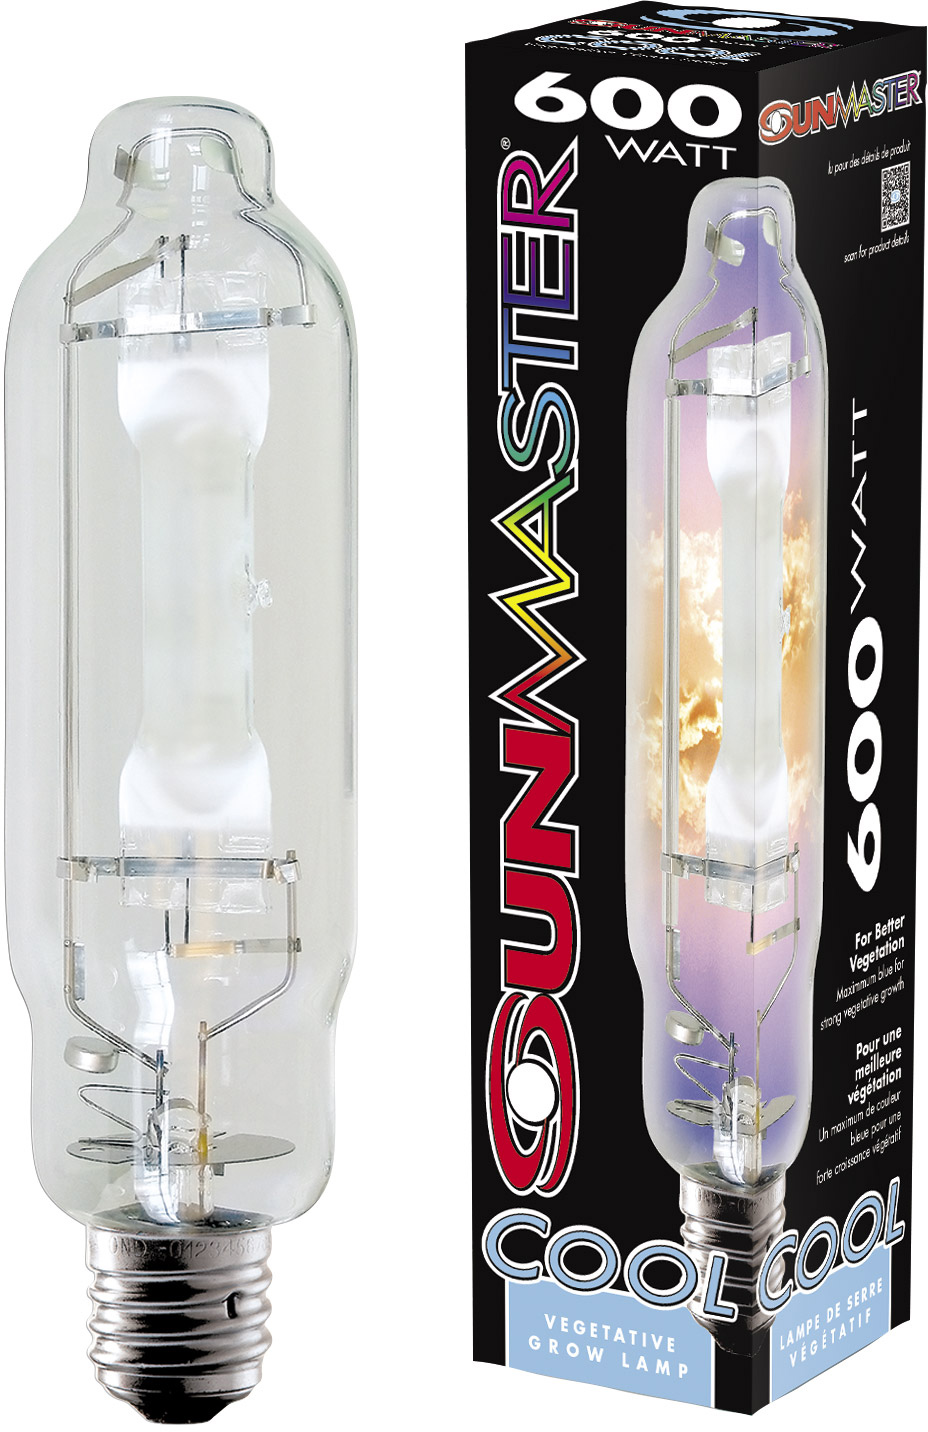 Picture for Sunmaster Cool Pulse Start Metal Halide, 600W